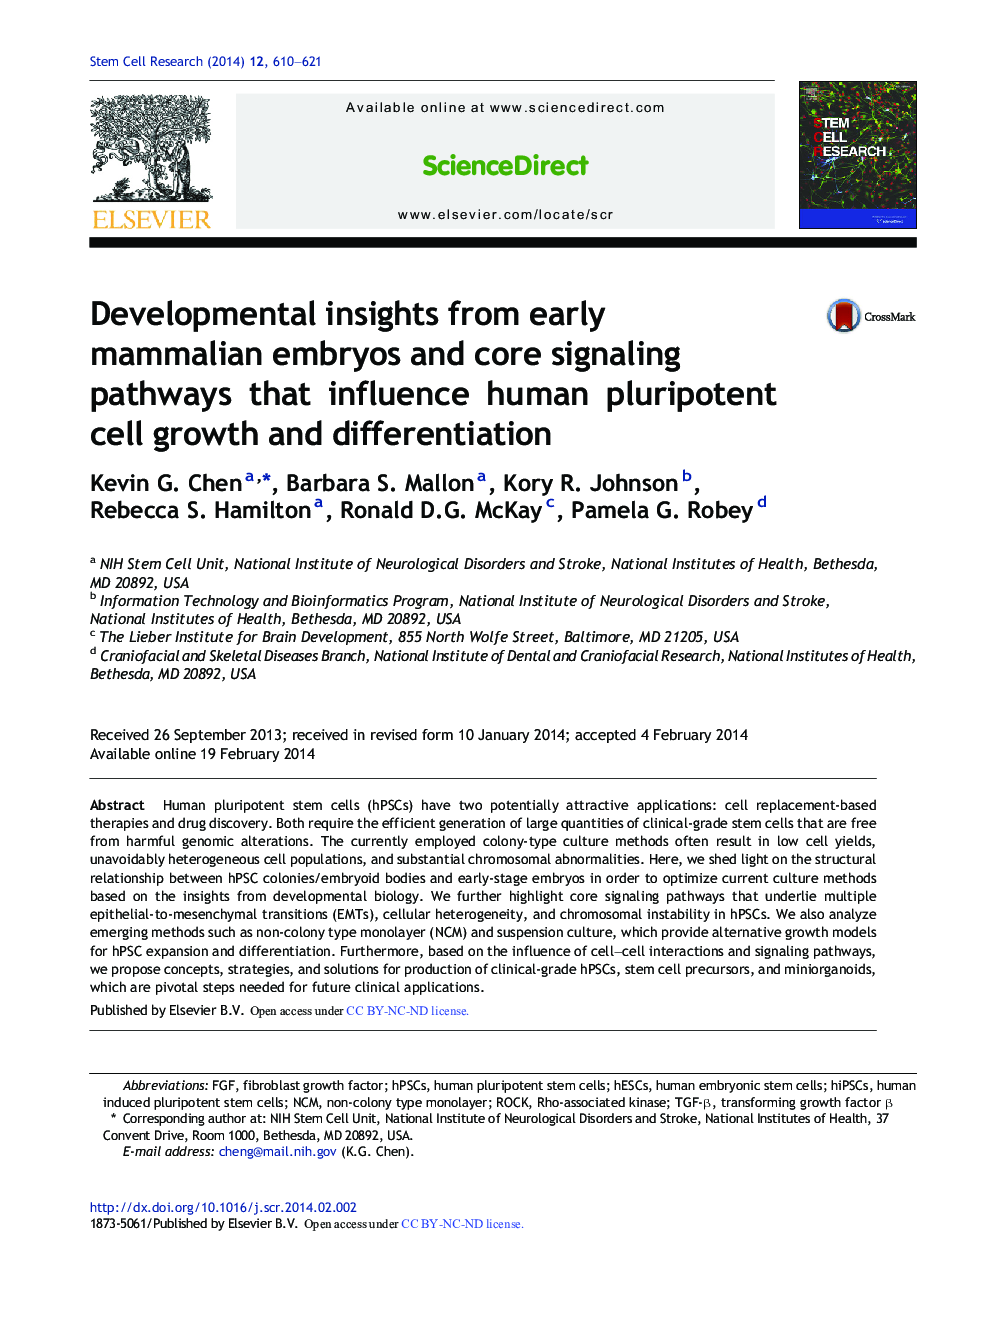 Developmental insights from early mammalian embryos and core signaling pathways that influence human pluripotent cell growth and differentiation